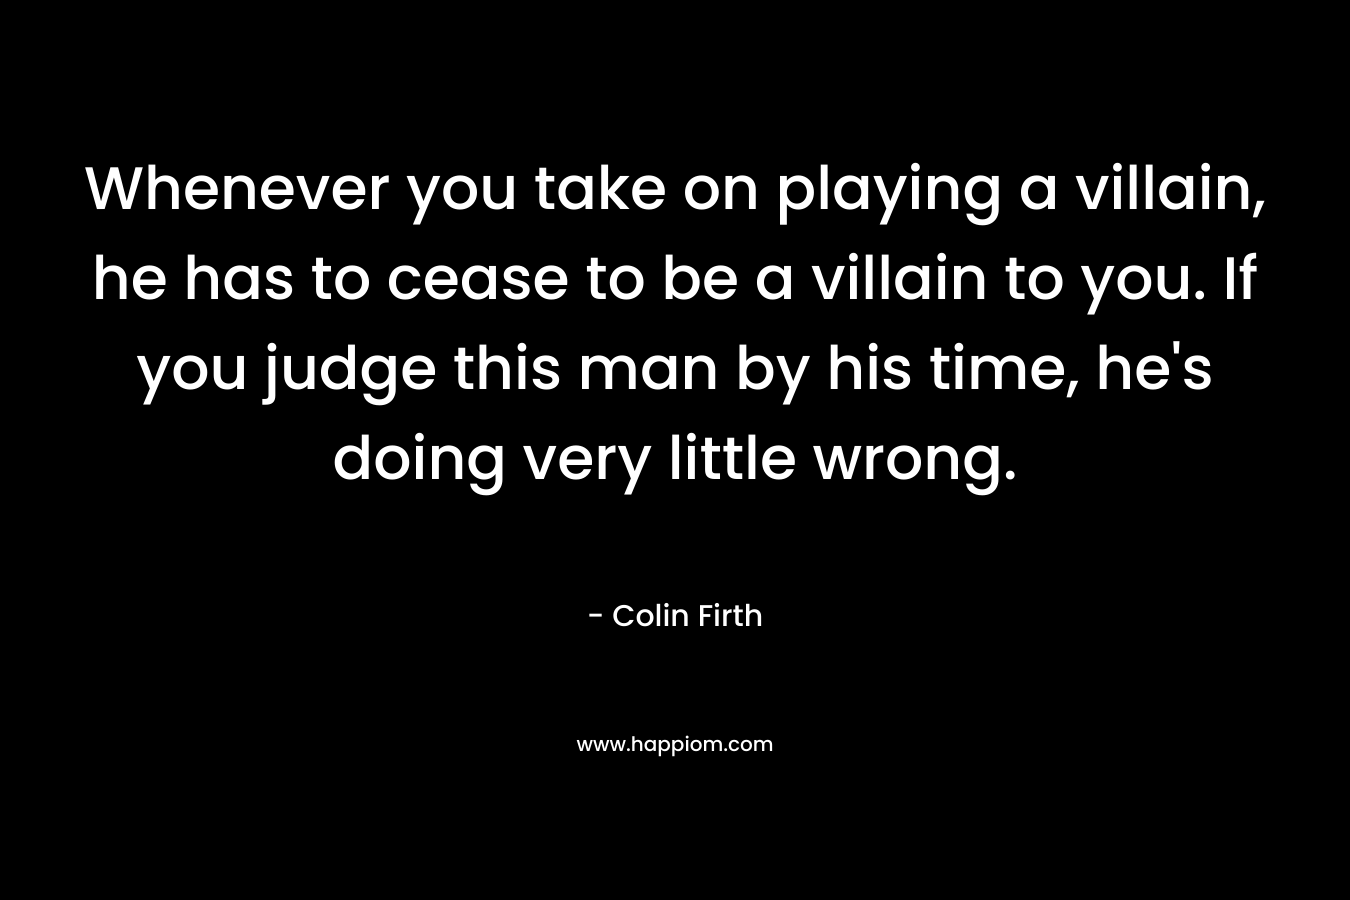 Whenever you take on playing a villain, he has to cease to be a villain to you. If you judge this man by his time, he’s doing very little wrong. – Colin Firth